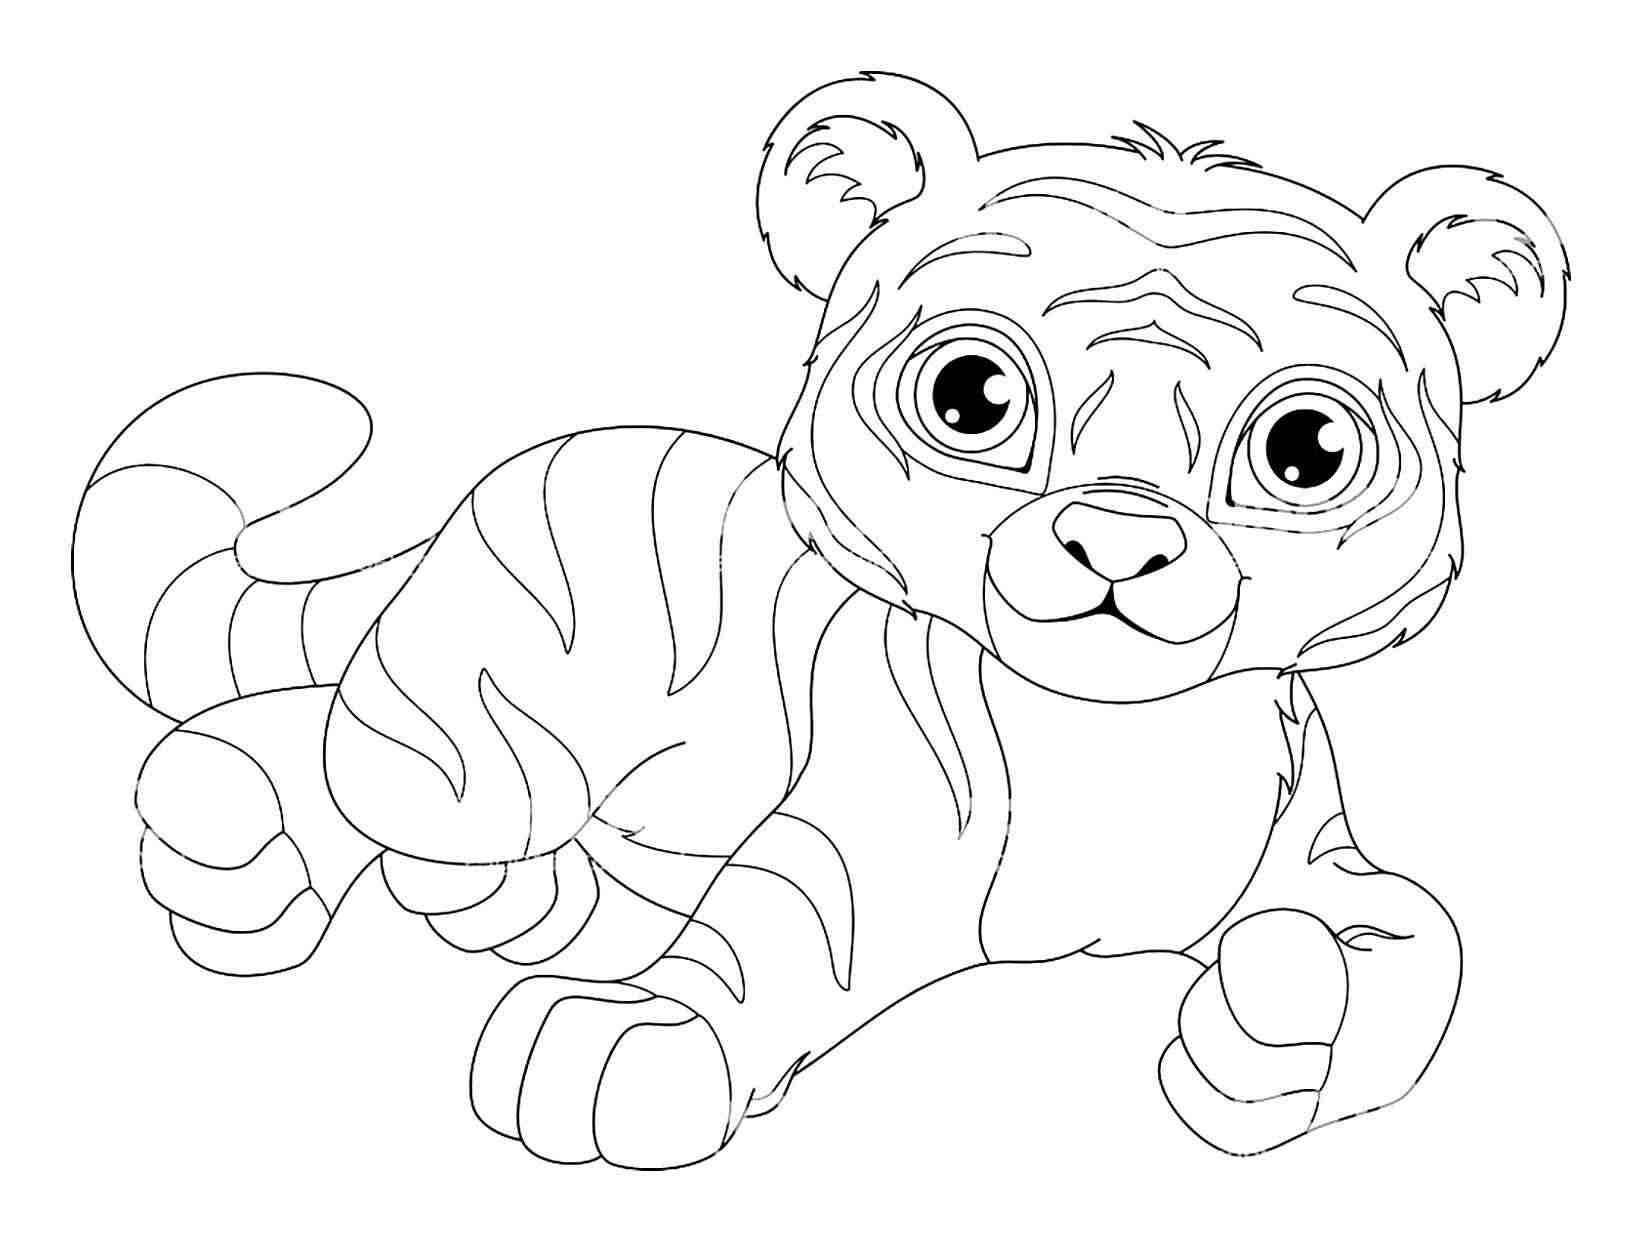 Cute baby tiger with big round eyes Coloring Pages - Tiger Coloring Pages - Coloring  Pages For Kids And Adults